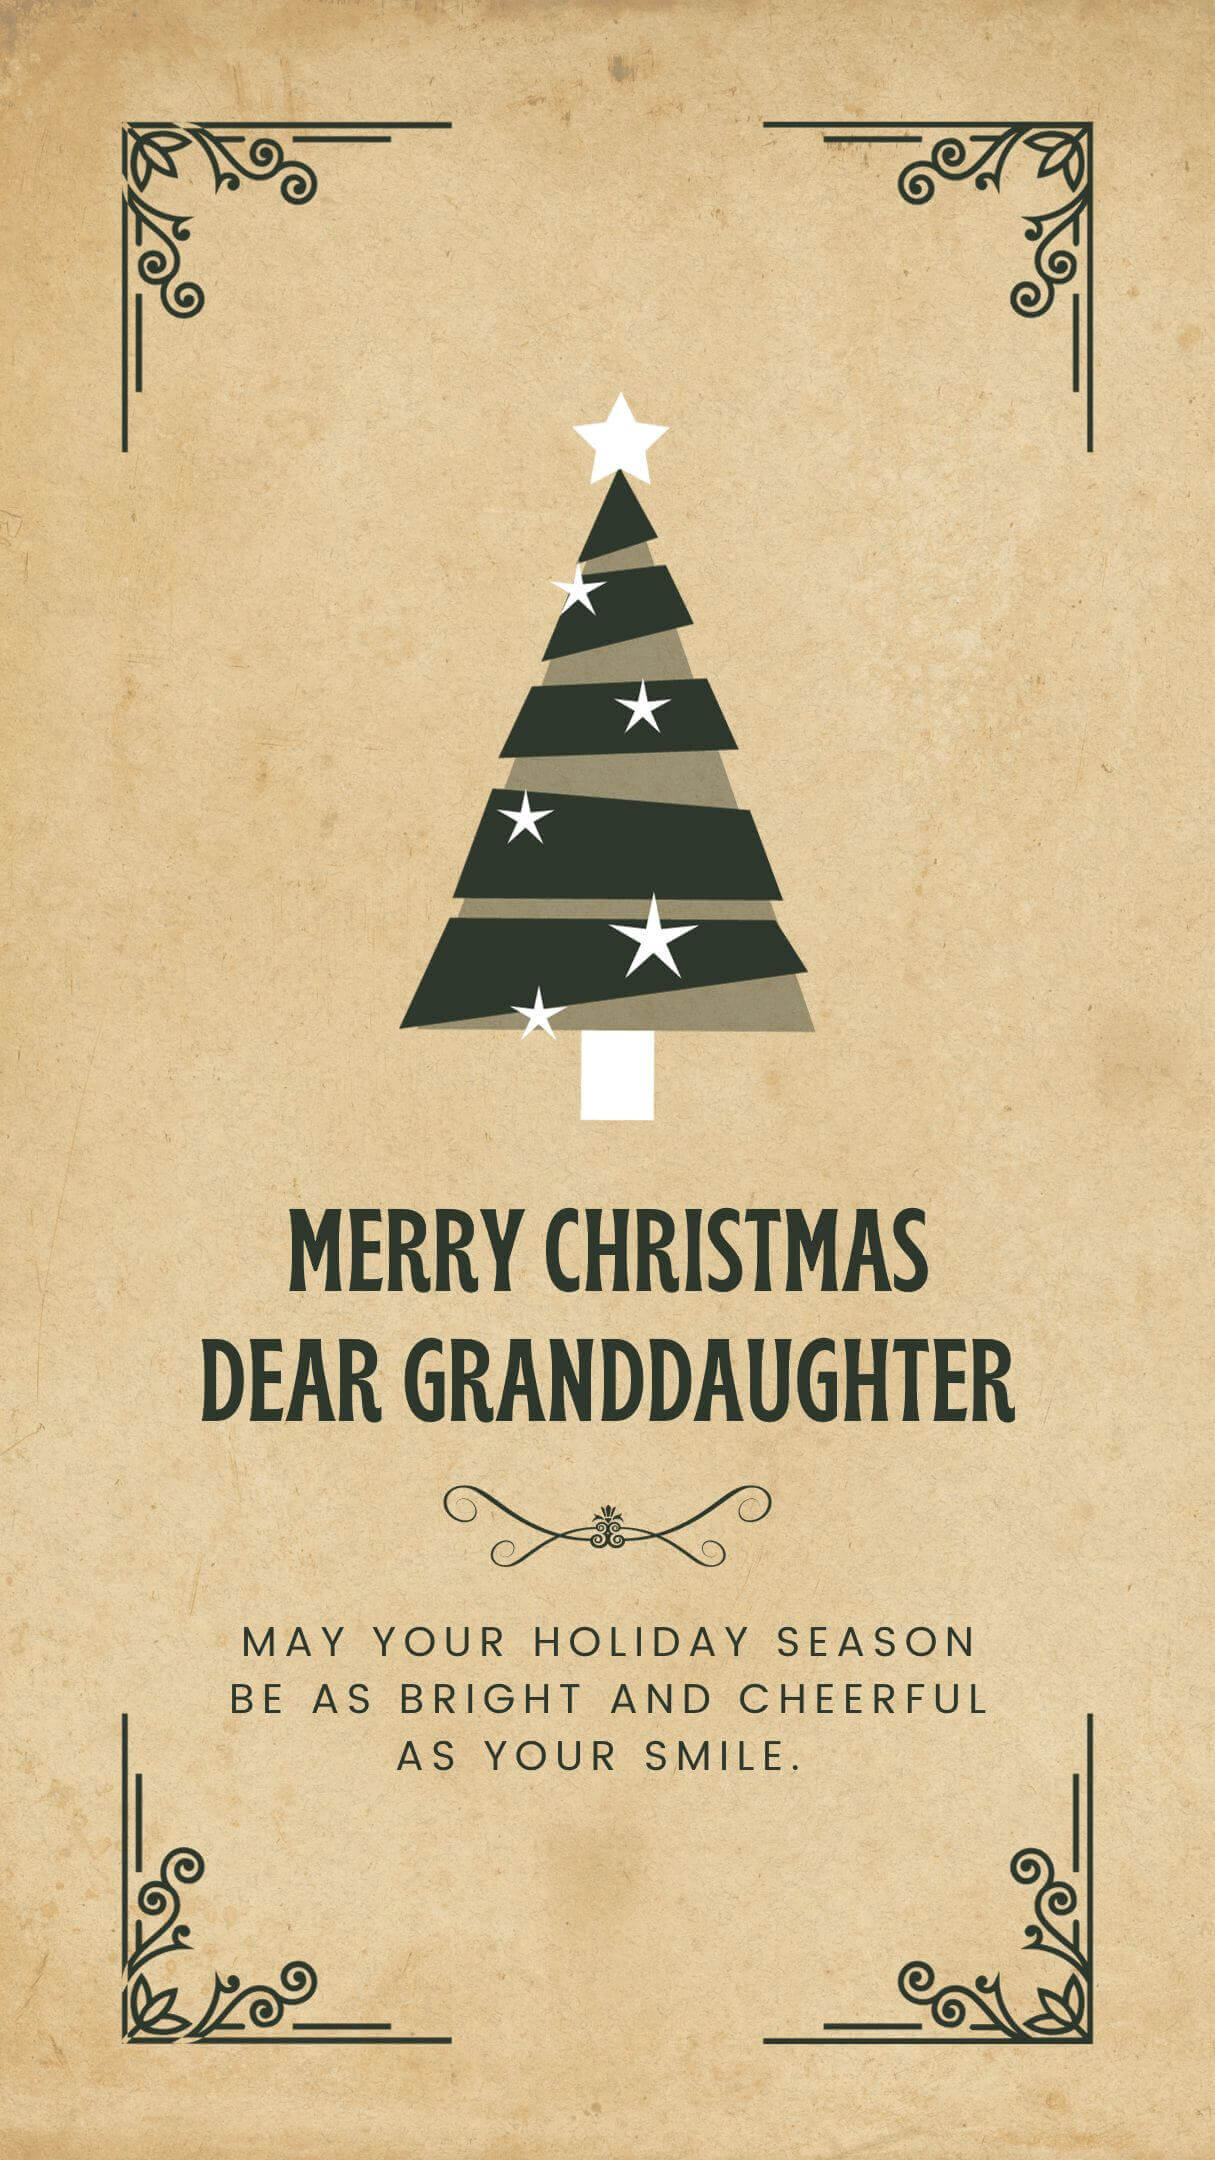 Christmas Wishes To Our Granddaughter